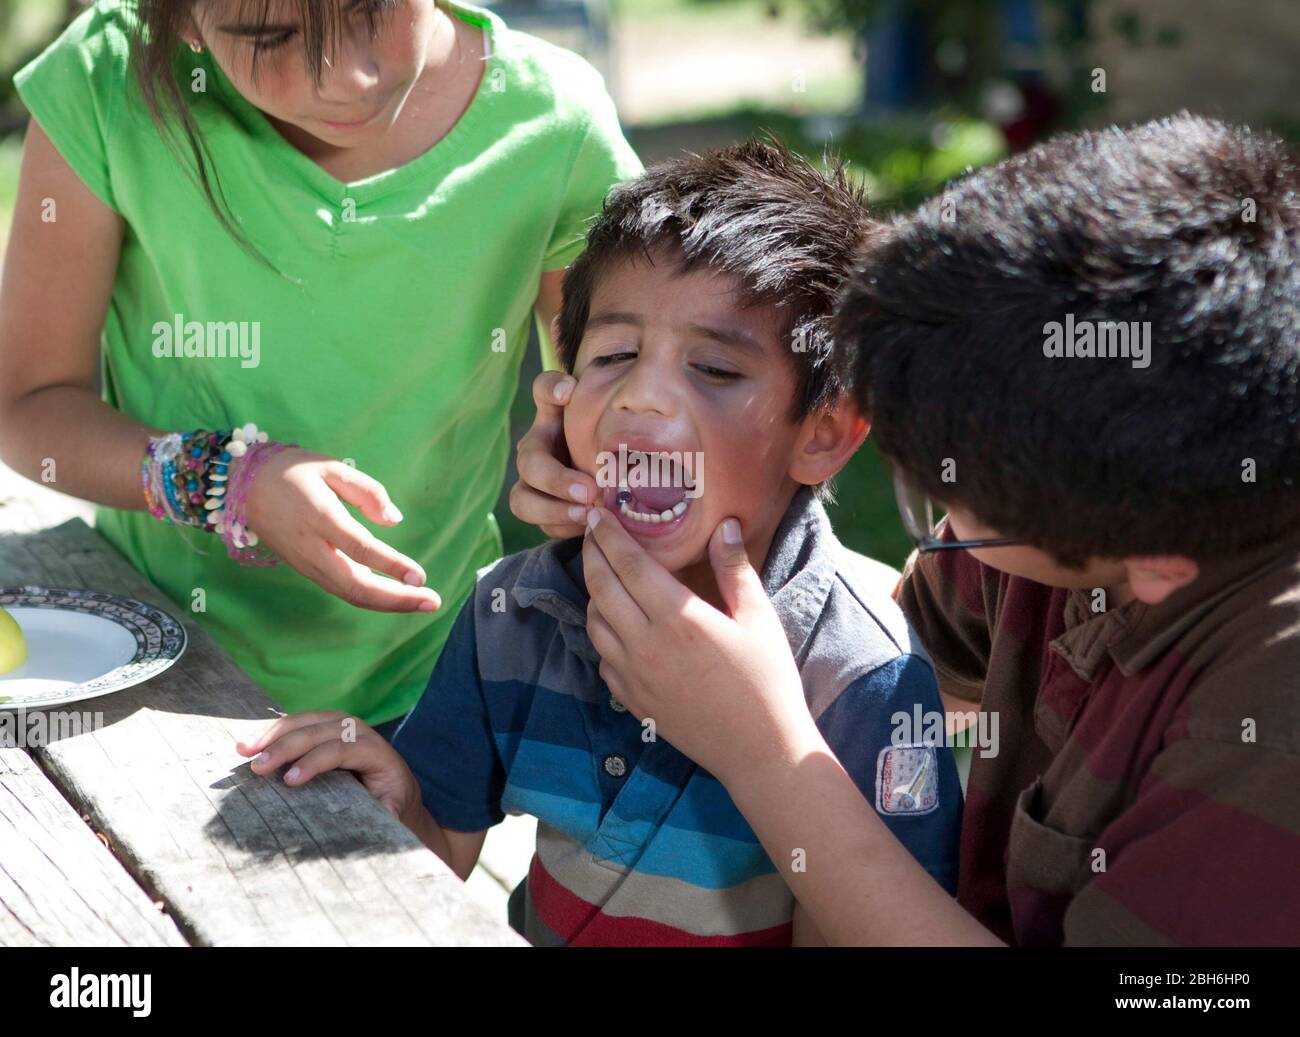 Austin, TX  April 22, 2009: Children examine the teeth of a four-year old Hispanic boy after he complained about a toothache at home. Model Release Available.   ©Bob Daemmrich Stock Photo